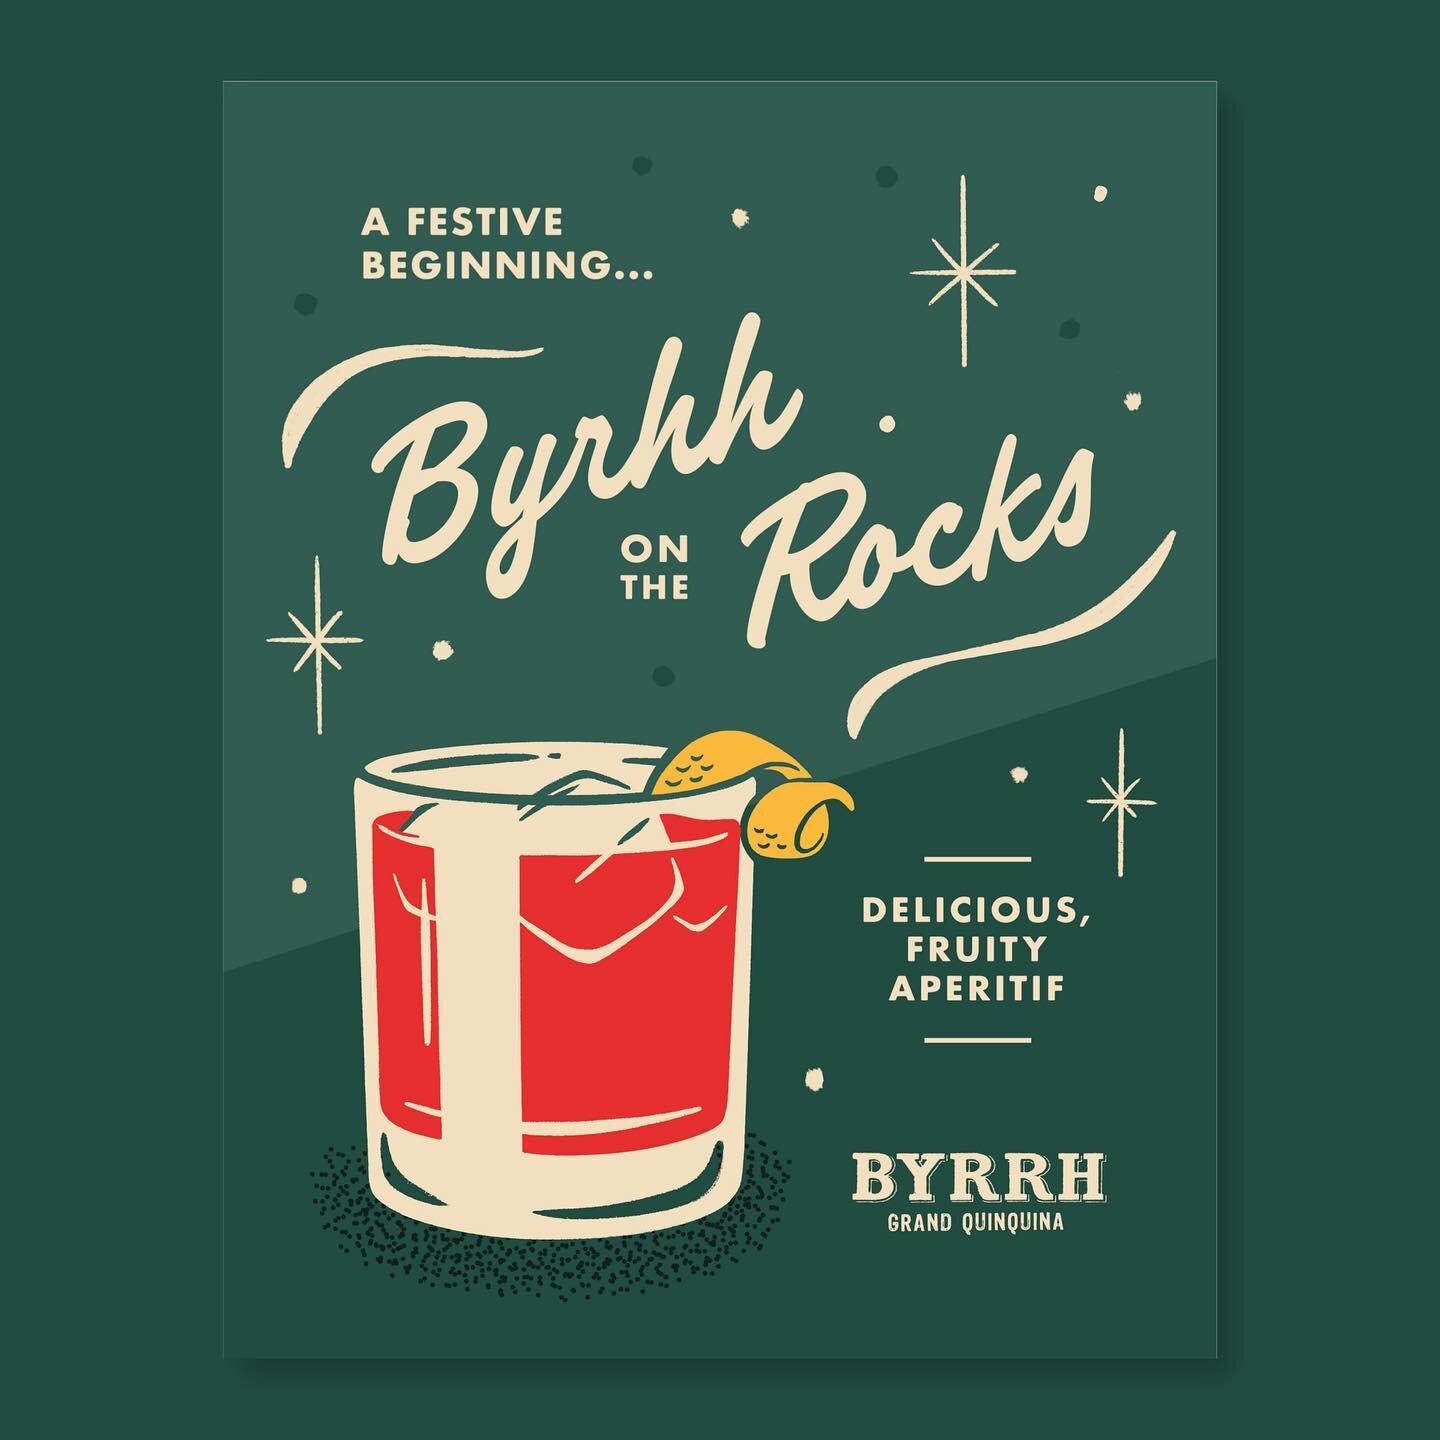 Kickin off the holiday season with some festive signage promoting @caves.byrrh ✨

#illustration #illustrationartists #illustrator #cocktails #cocktailart #wintercocktails #digitalart #digitalillustration #graphicdesign #graphicdesigner